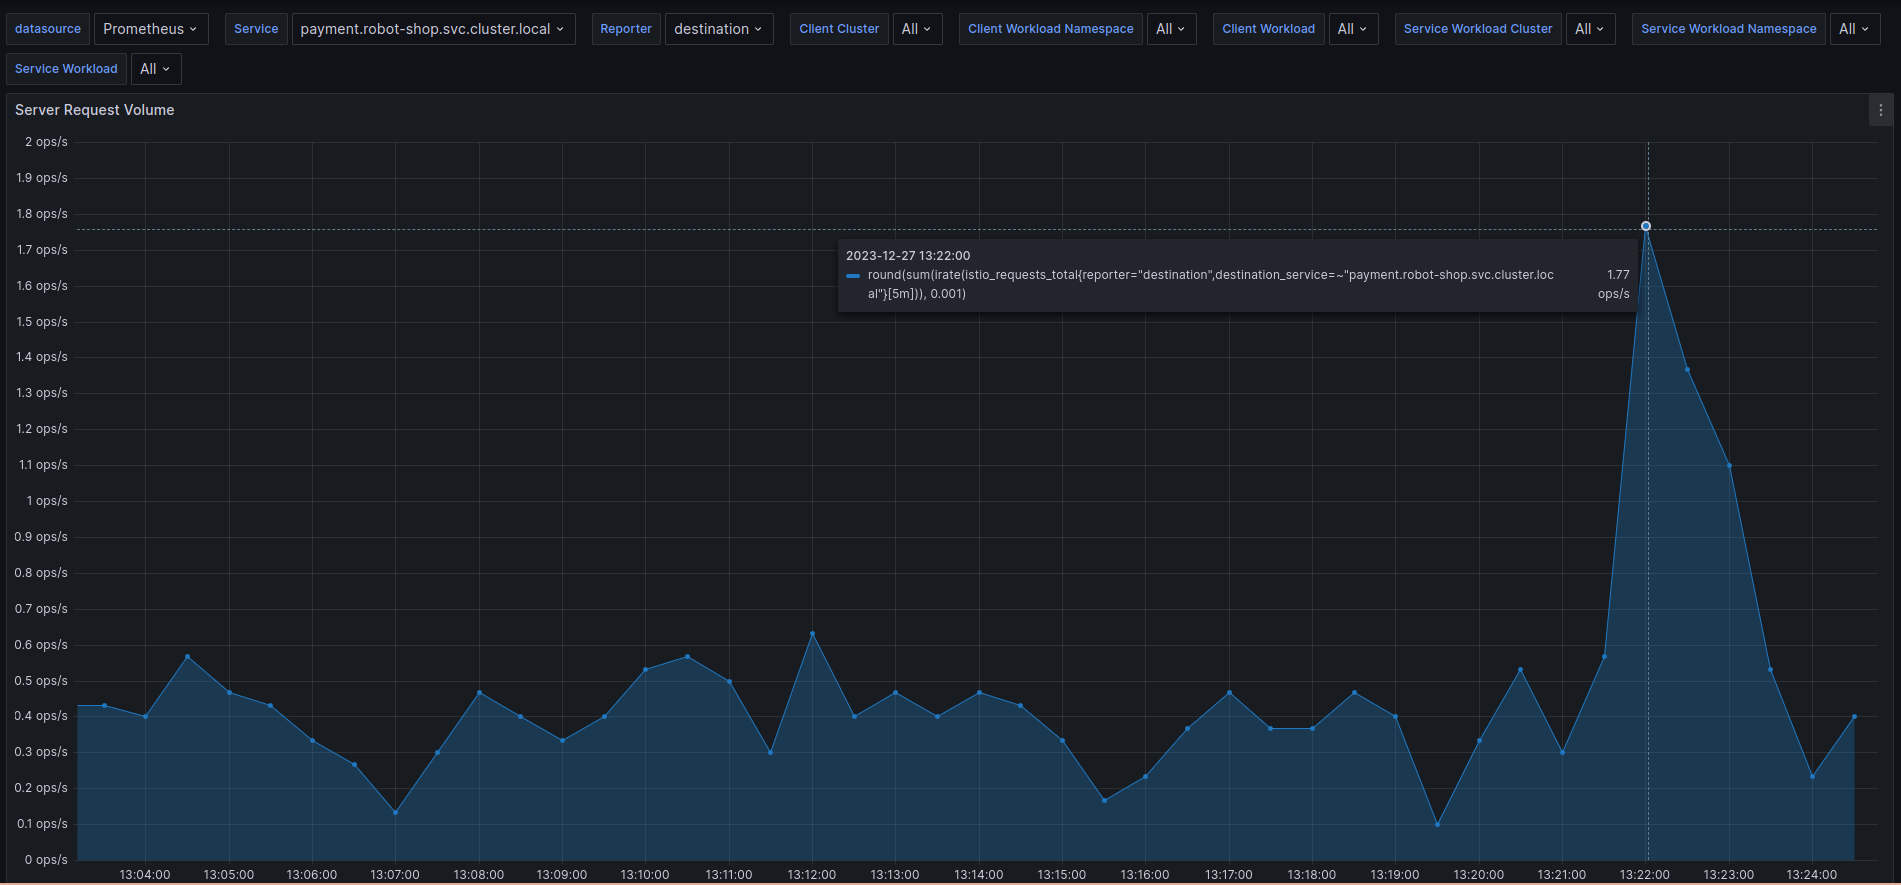 Payment service dashboard showing extremely low number of requests per second